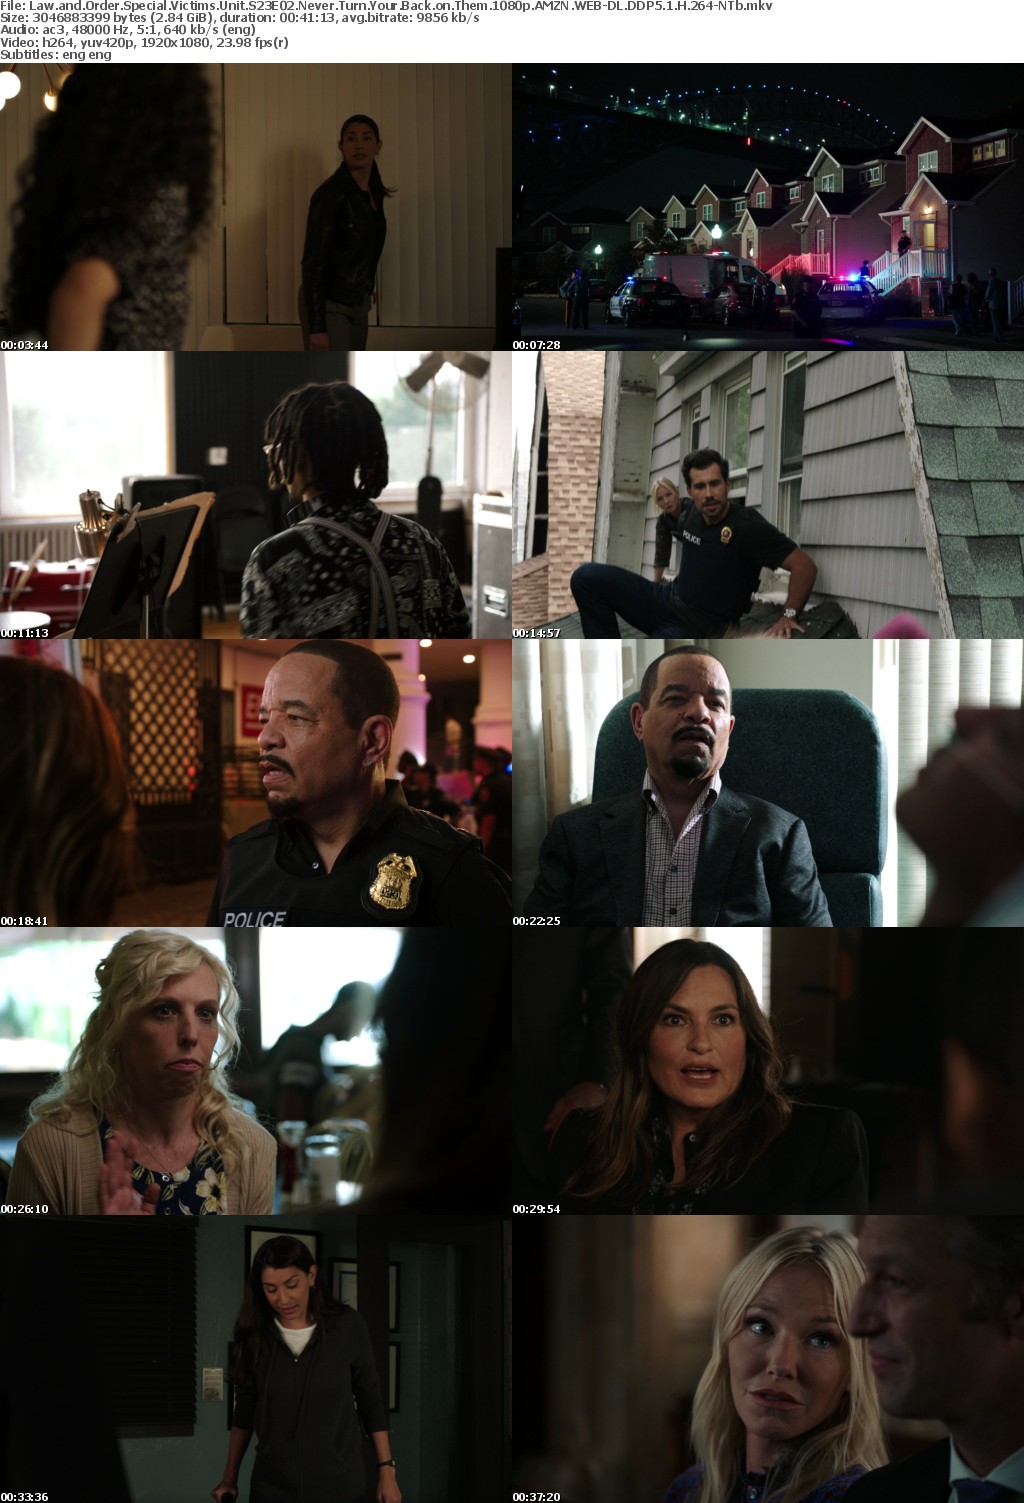 Law and Order SVU S23E02 Never Turn Your Back on Them 1080p AMZN WEBRip DDP5 1 x264